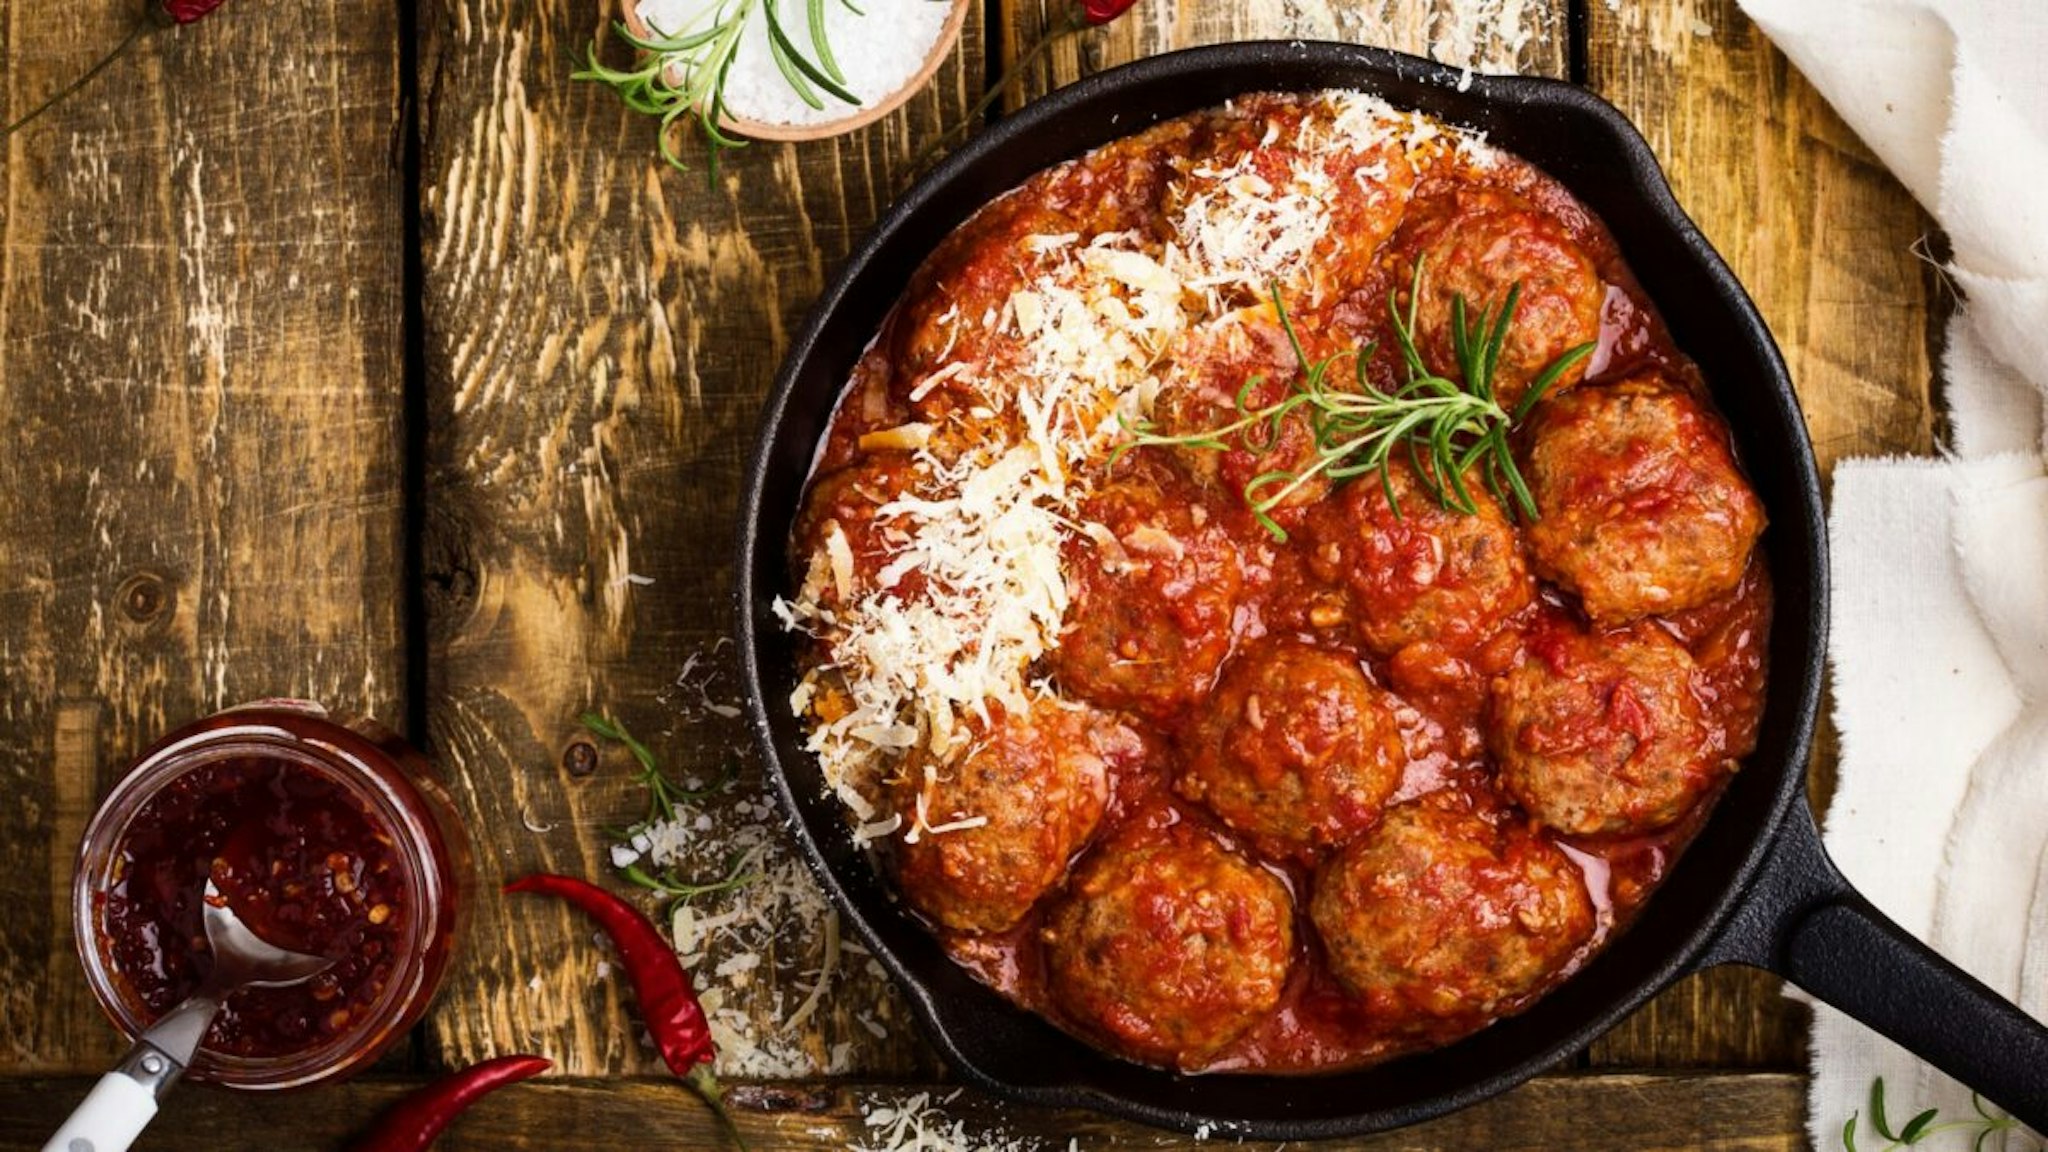 Homemade meatballs in sweet and sour tomato sauce with grated parmesan cheese on top on rustic wooden table viewed from above